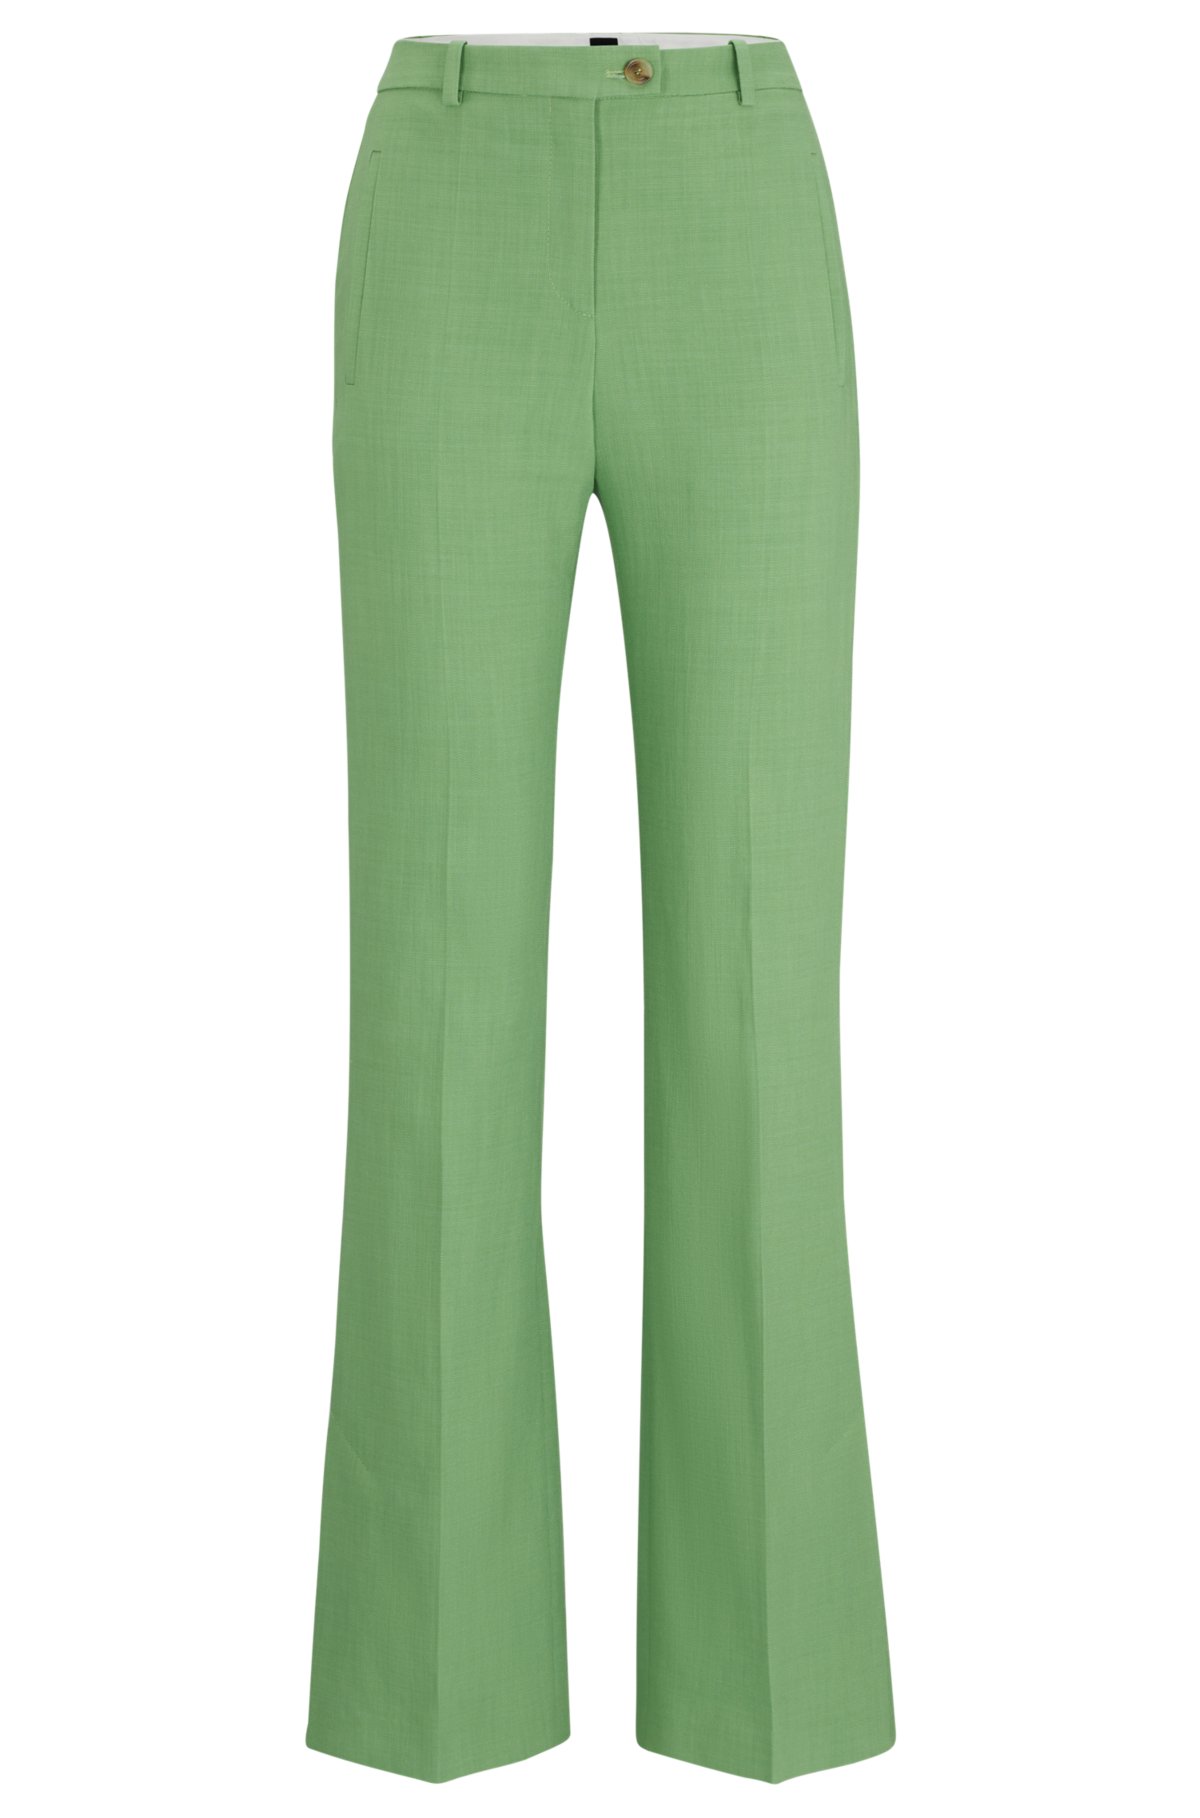 Slim Fit Flare Trousers